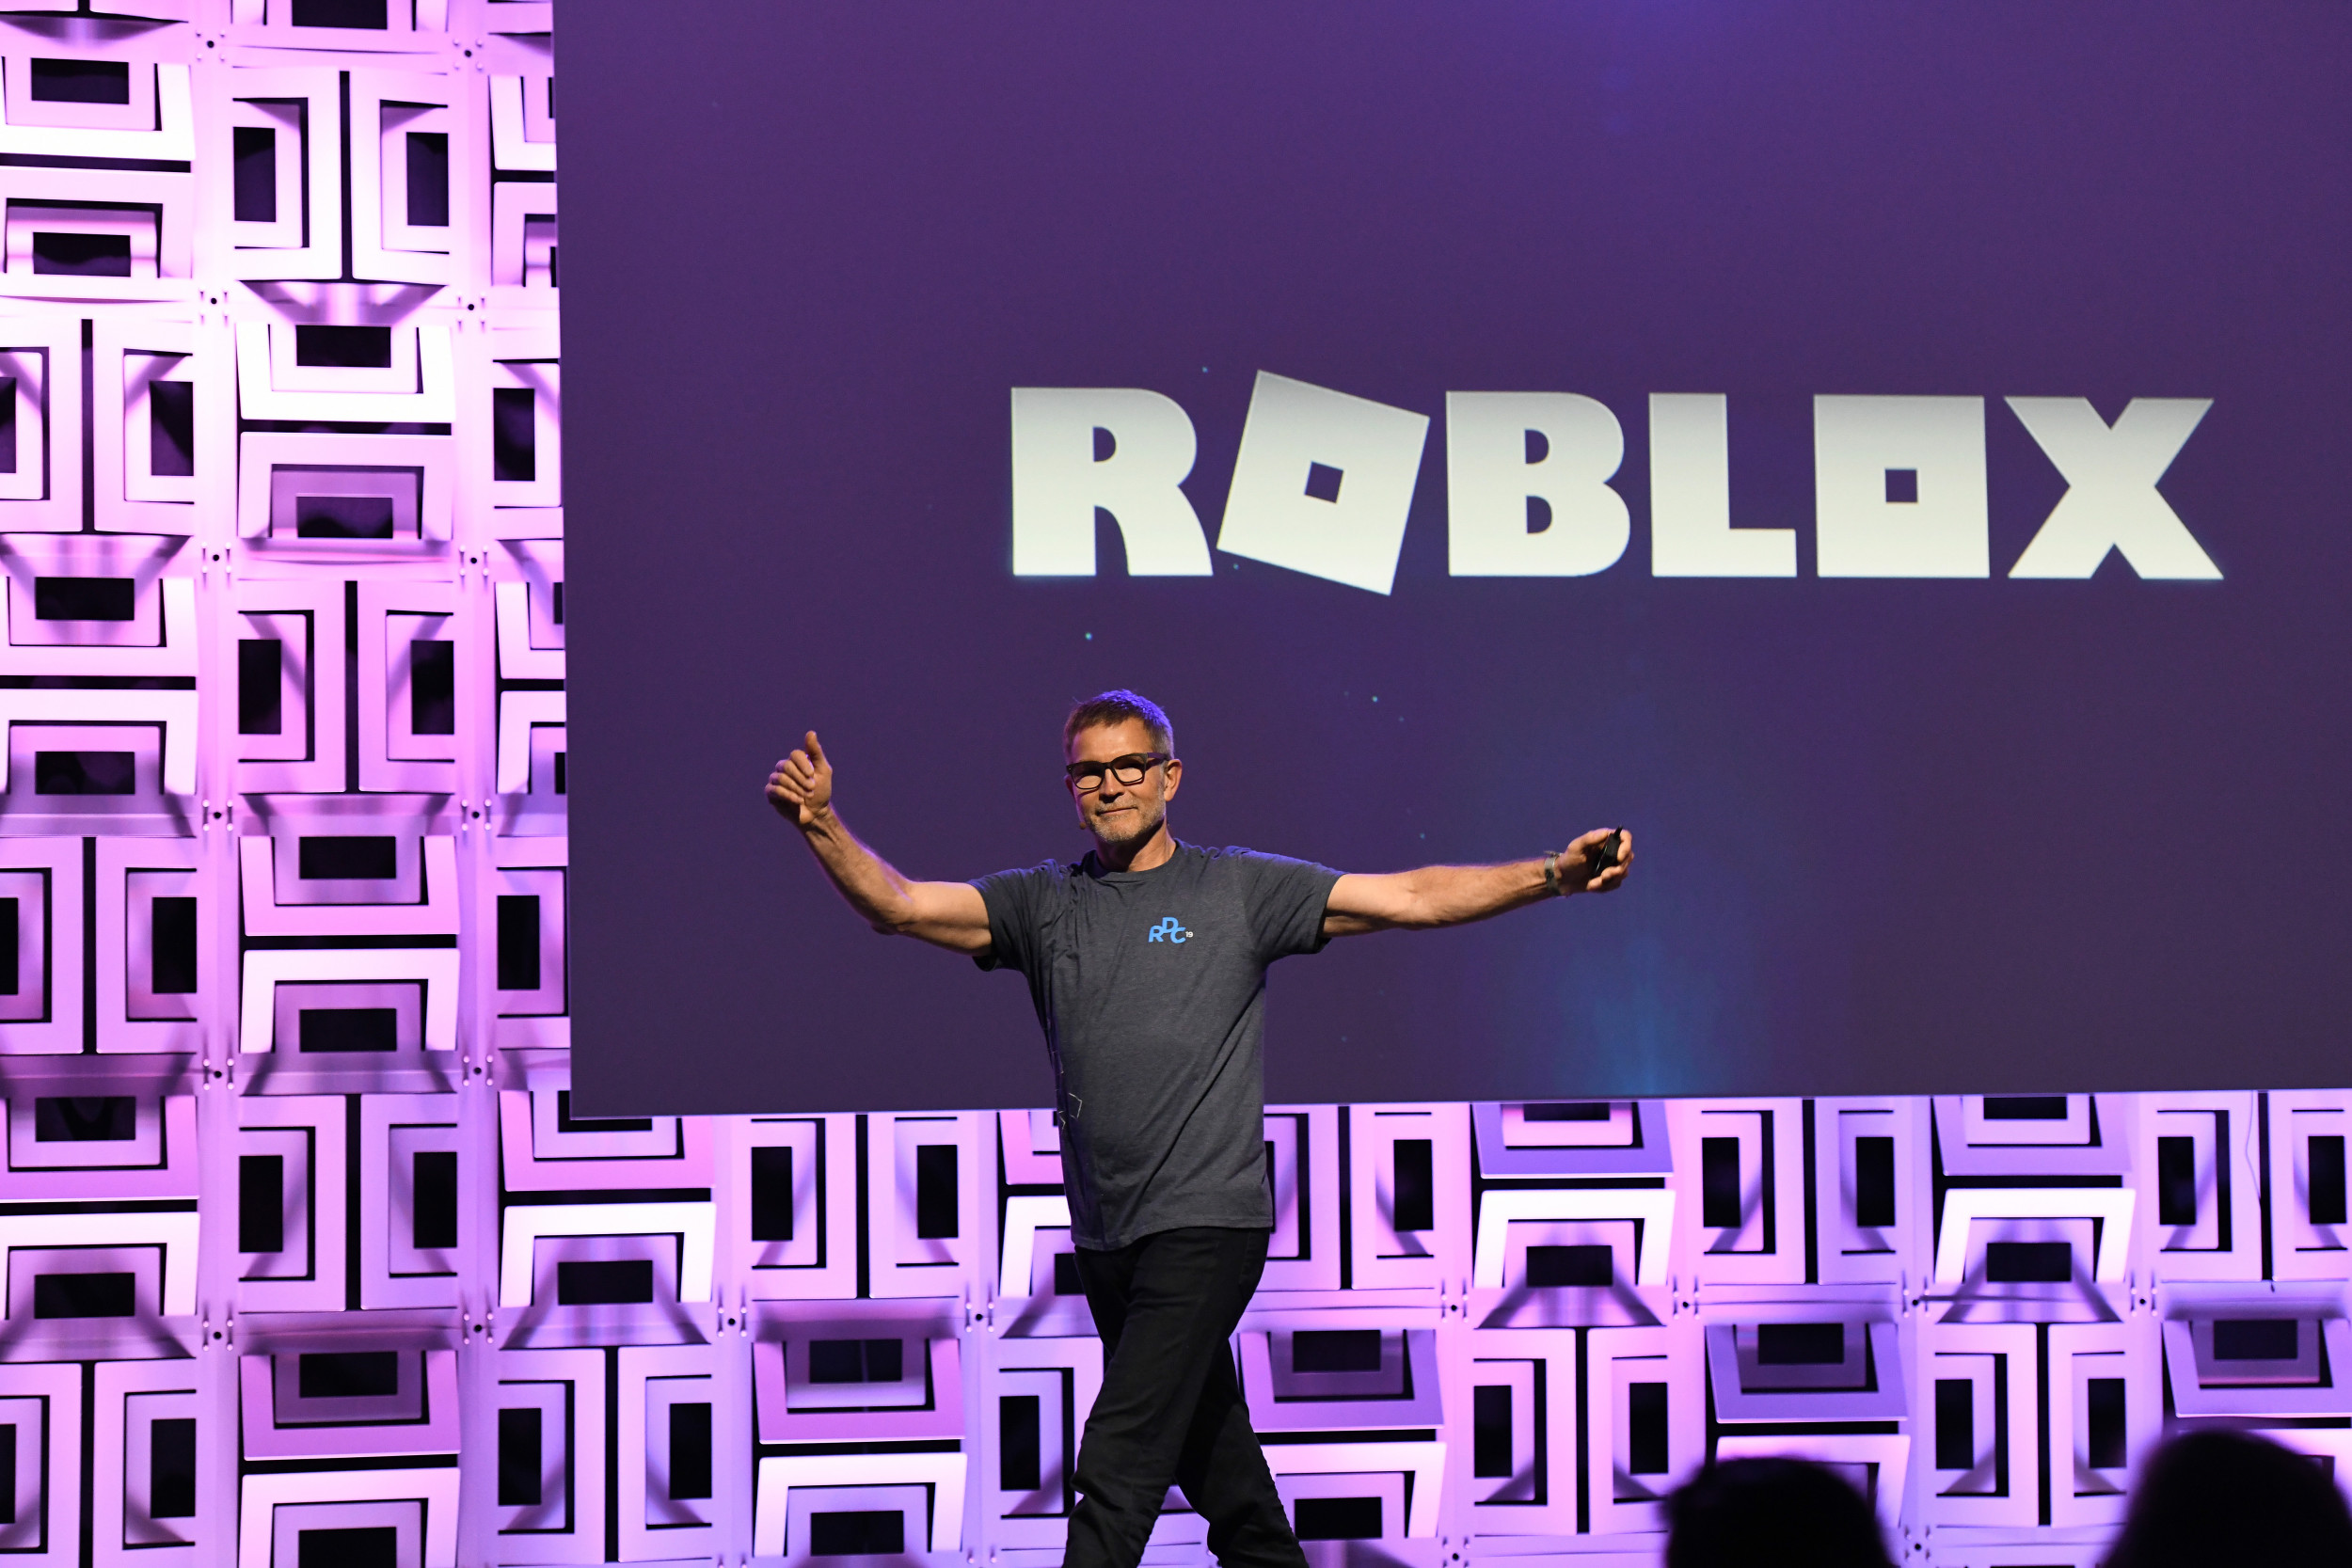 What Is Roblox Gaming Firm Valued At 45 2 Billion After Going Public On Nyse - how many members does 20k robux ads get